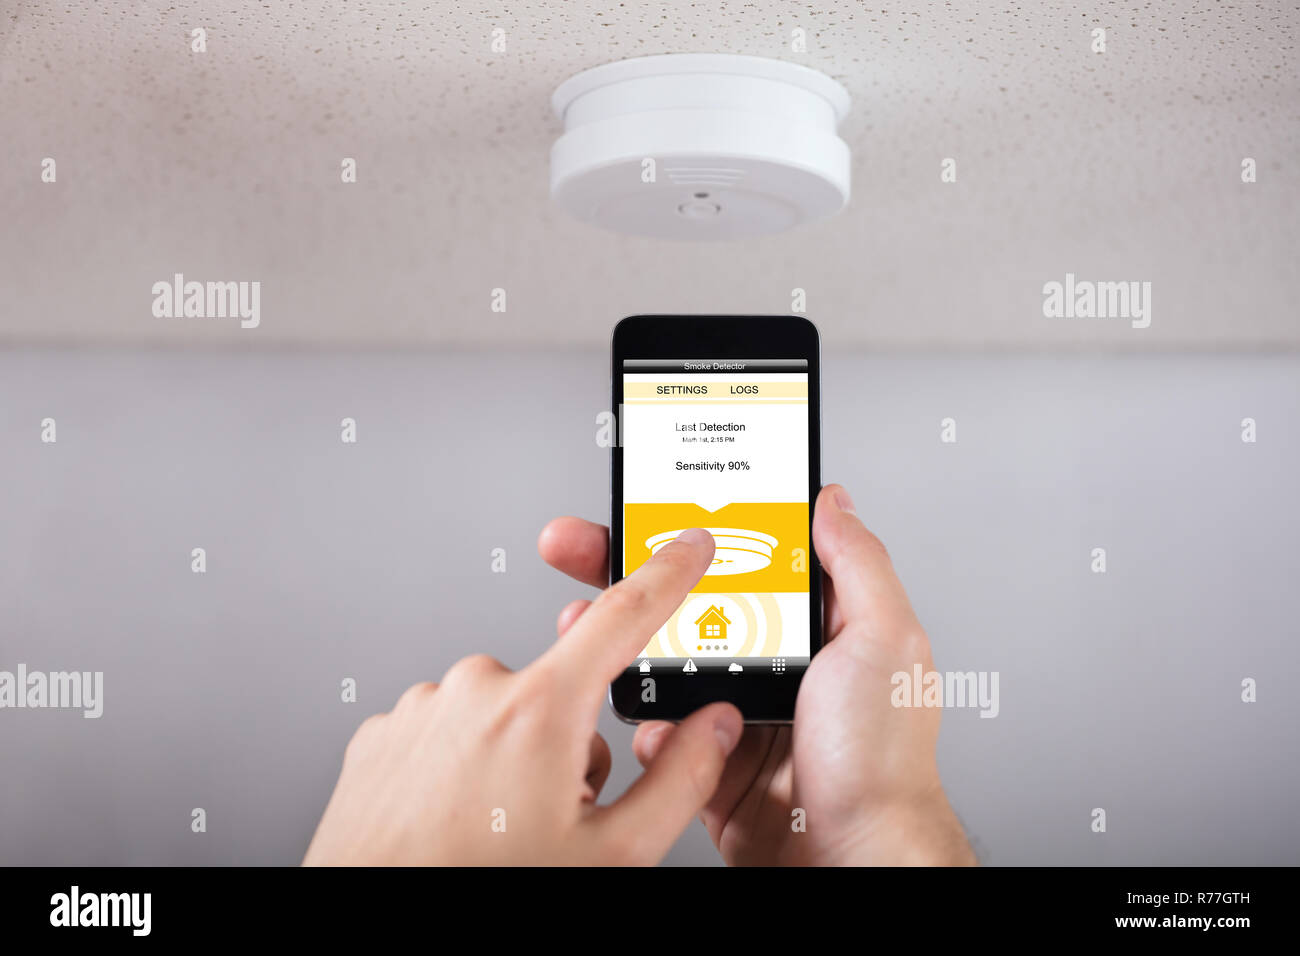 Person Operating Smoke Detector With Mobile Phone Stock Photo